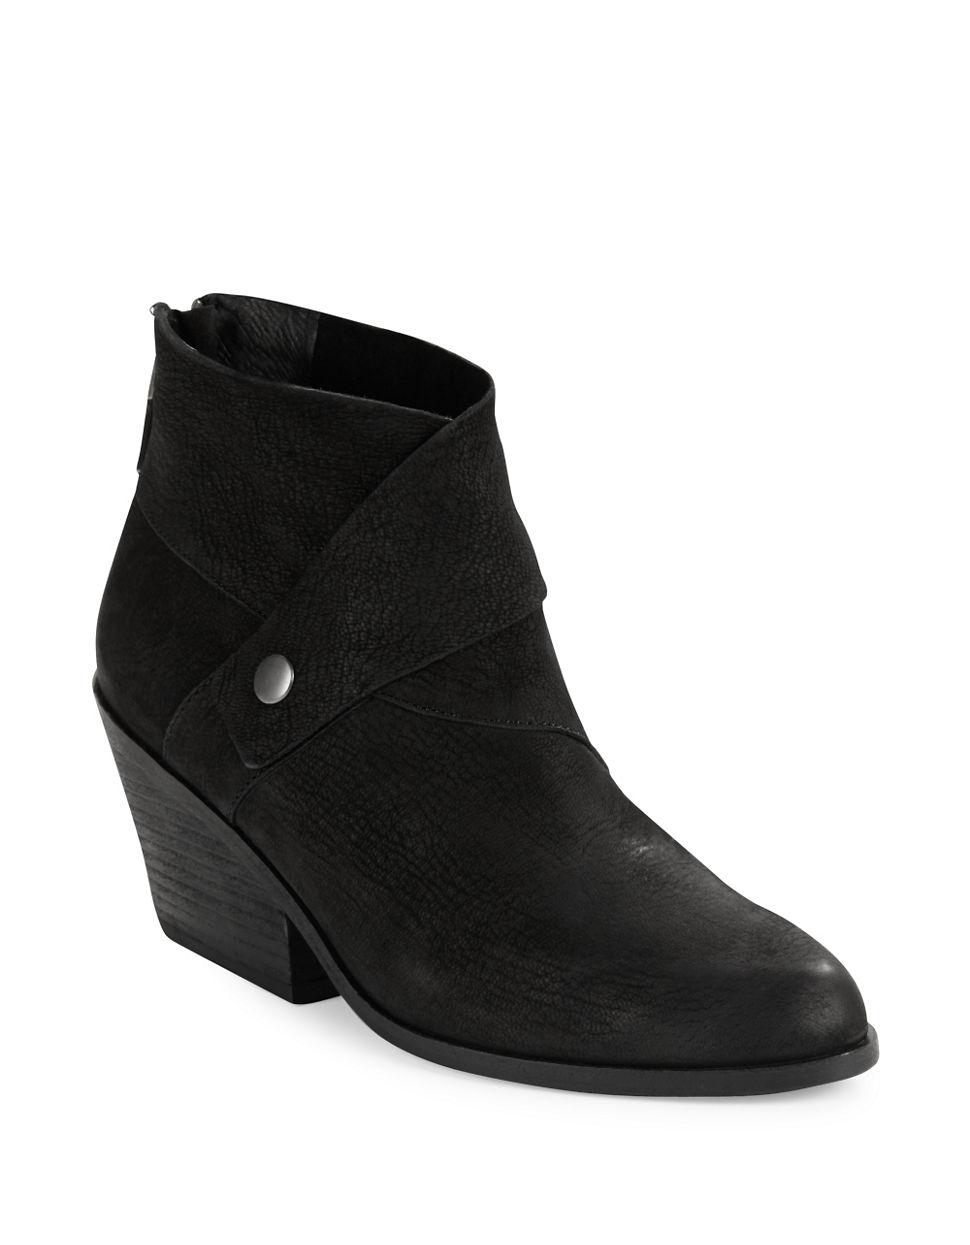 Eileen Fisher Tag Suede Ankle Boots in Black Lyst